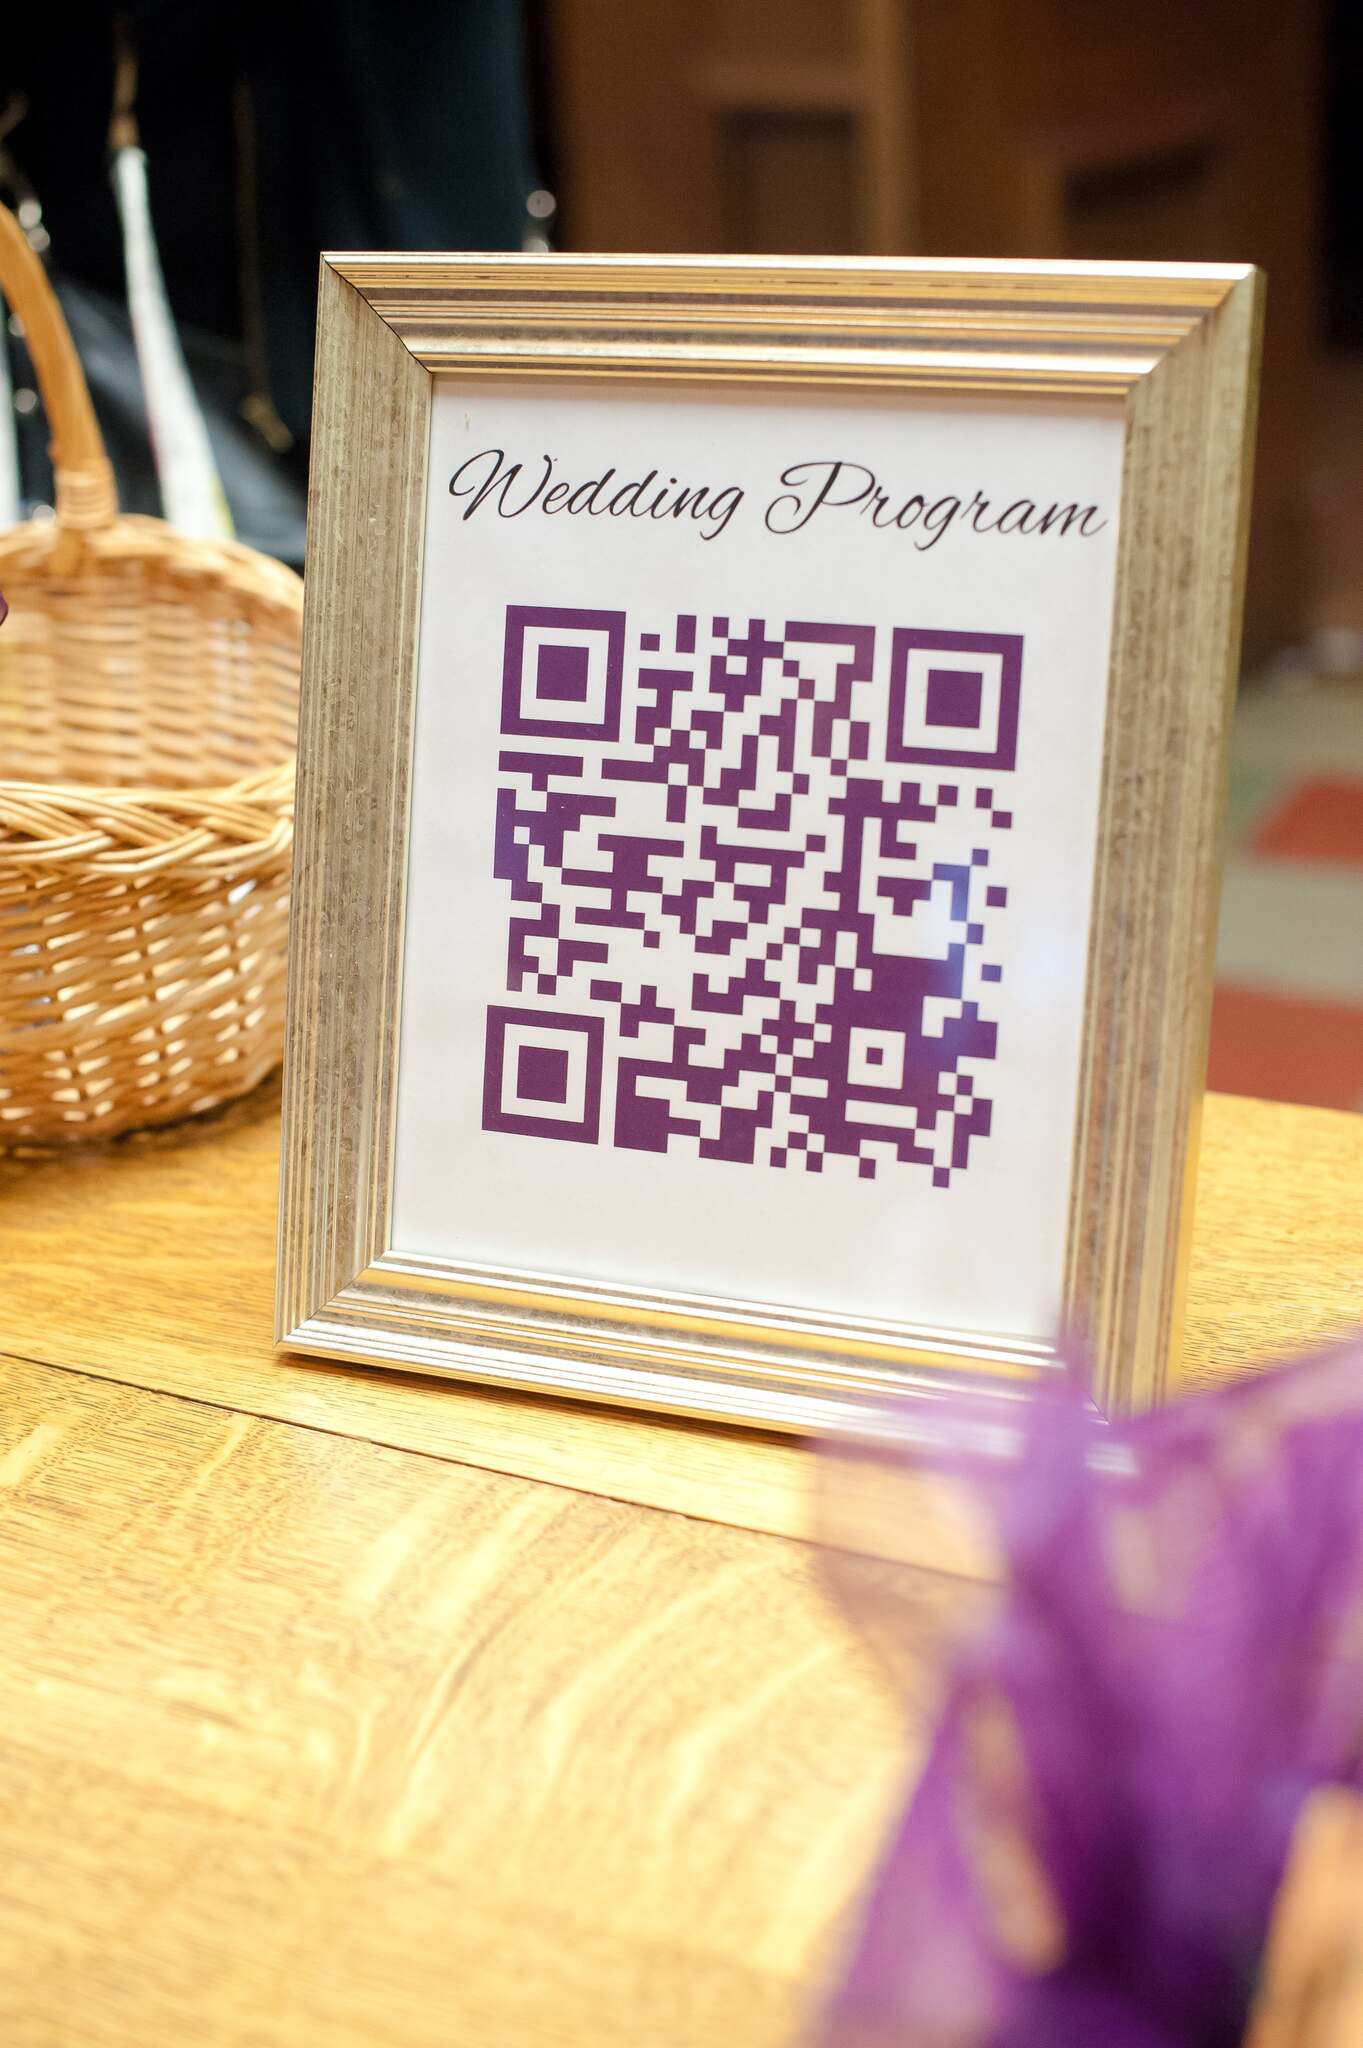 A frame that has a QR code for the wedding program